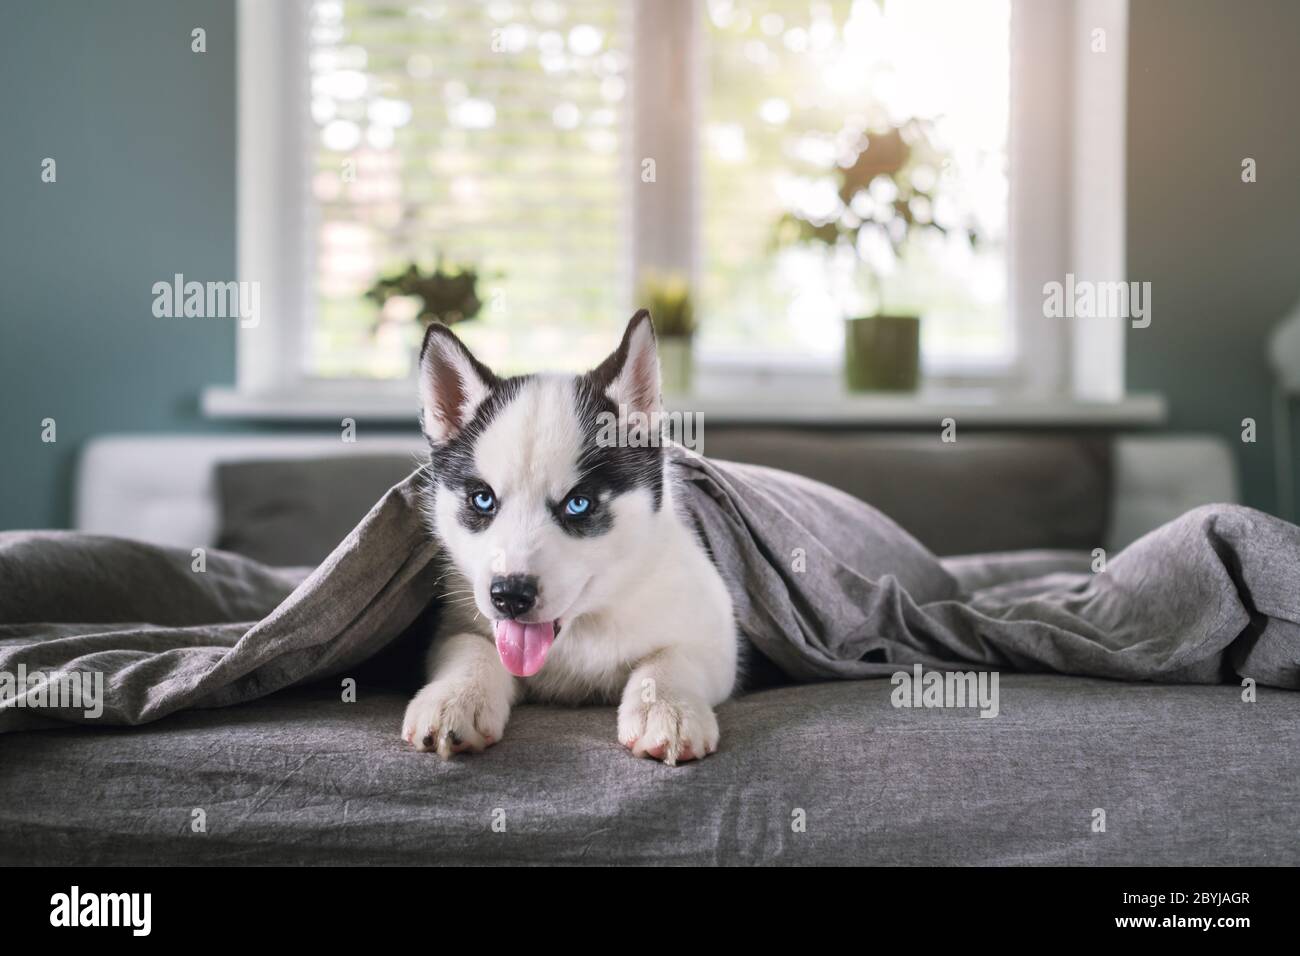 A small white dog puppy breed siberian husky with beautiful blue eyes sleep on grey carpet. Dogs and pet photography Stock Photo